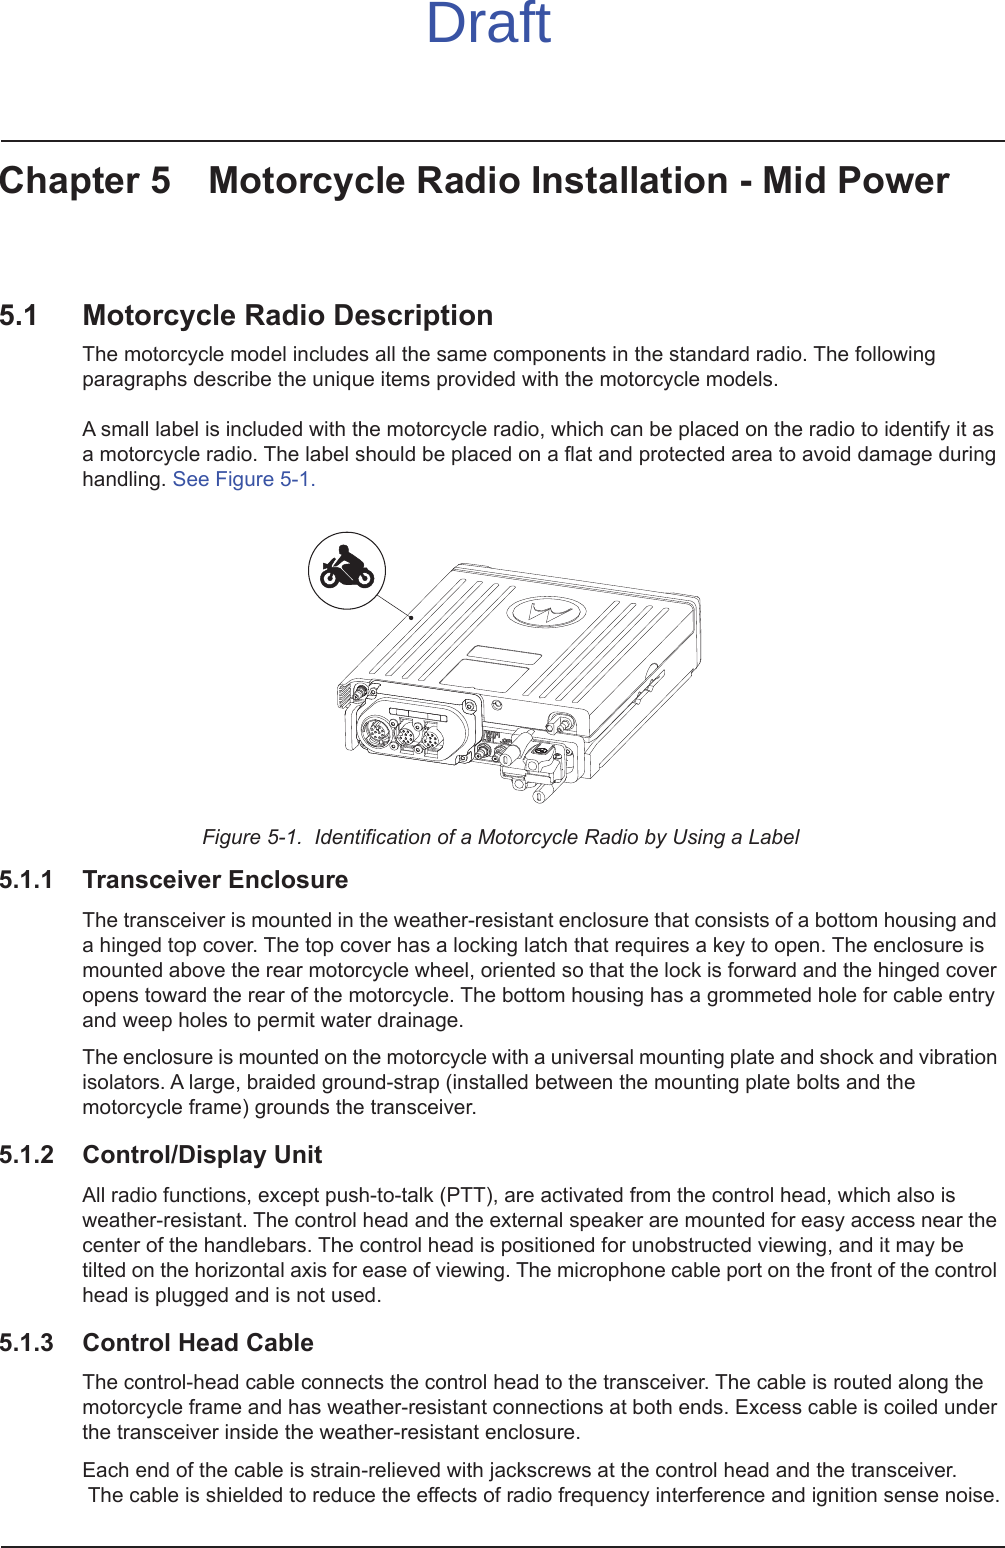 Chapter 5 Motorcycle Radio Installation - Mid Power5.1 Motorcycle Radio DescriptionThe motorcycle model includes all the same components in the standard radio. The following paragraphs describe the unique items provided with the motorcycle models.   A small label is included with the motorcycle radio, which can be placed on the radio to identify it as a motorcycle radio. The label should be placed on a flat and protected area to avoid damage during handling. See Figure 5-1.Figure 5-1.  Identification of a Motorcycle Radio by Using a Label5.1.1 Transceiver EnclosureThe transceiver is mounted in the weather-resistant enclosure that consists of a bottom housing and a hinged top cover. The top cover has a locking latch that requires a key to open. The enclosure is mounted above the rear motorcycle wheel, oriented so that the lock is forward and the hinged cover opens toward the rear of the motorcycle. The bottom housing has a grommeted hole for cable entry and weep holes to permit water drainage.The enclosure is mounted on the motorcycle with a universal mounting plate and shock and vibration isolators. A large, braided ground-strap (installed between the mounting plate bolts and the motorcycle frame) grounds the transceiver.5.1.2 Control/Display UnitAll radio functions, except push-to-talk (PTT), are activated from the control head, which also is weather-resistant. The control head and the external speaker are mounted for easy access near the center of the handlebars. The control head is positioned for unobstructed viewing, and it may be tilted on the horizontal axis for ease of viewing. The microphone cable port on the front of the control head is plugged and is not used. 5.1.3 Control Head CableThe control-head cable connects the control head to the transceiver. The cable is routed along the motorcycle frame and has weather-resistant connections at both ends. Excess cable is coiled under the transceiver inside the weather-resistant enclosure.Each end of the cable is strain-relieved with jackscrews at the control head and the transceiver.  The cable is shielded to reduce the effects of radio frequency interference and ignition sense noise.Draft